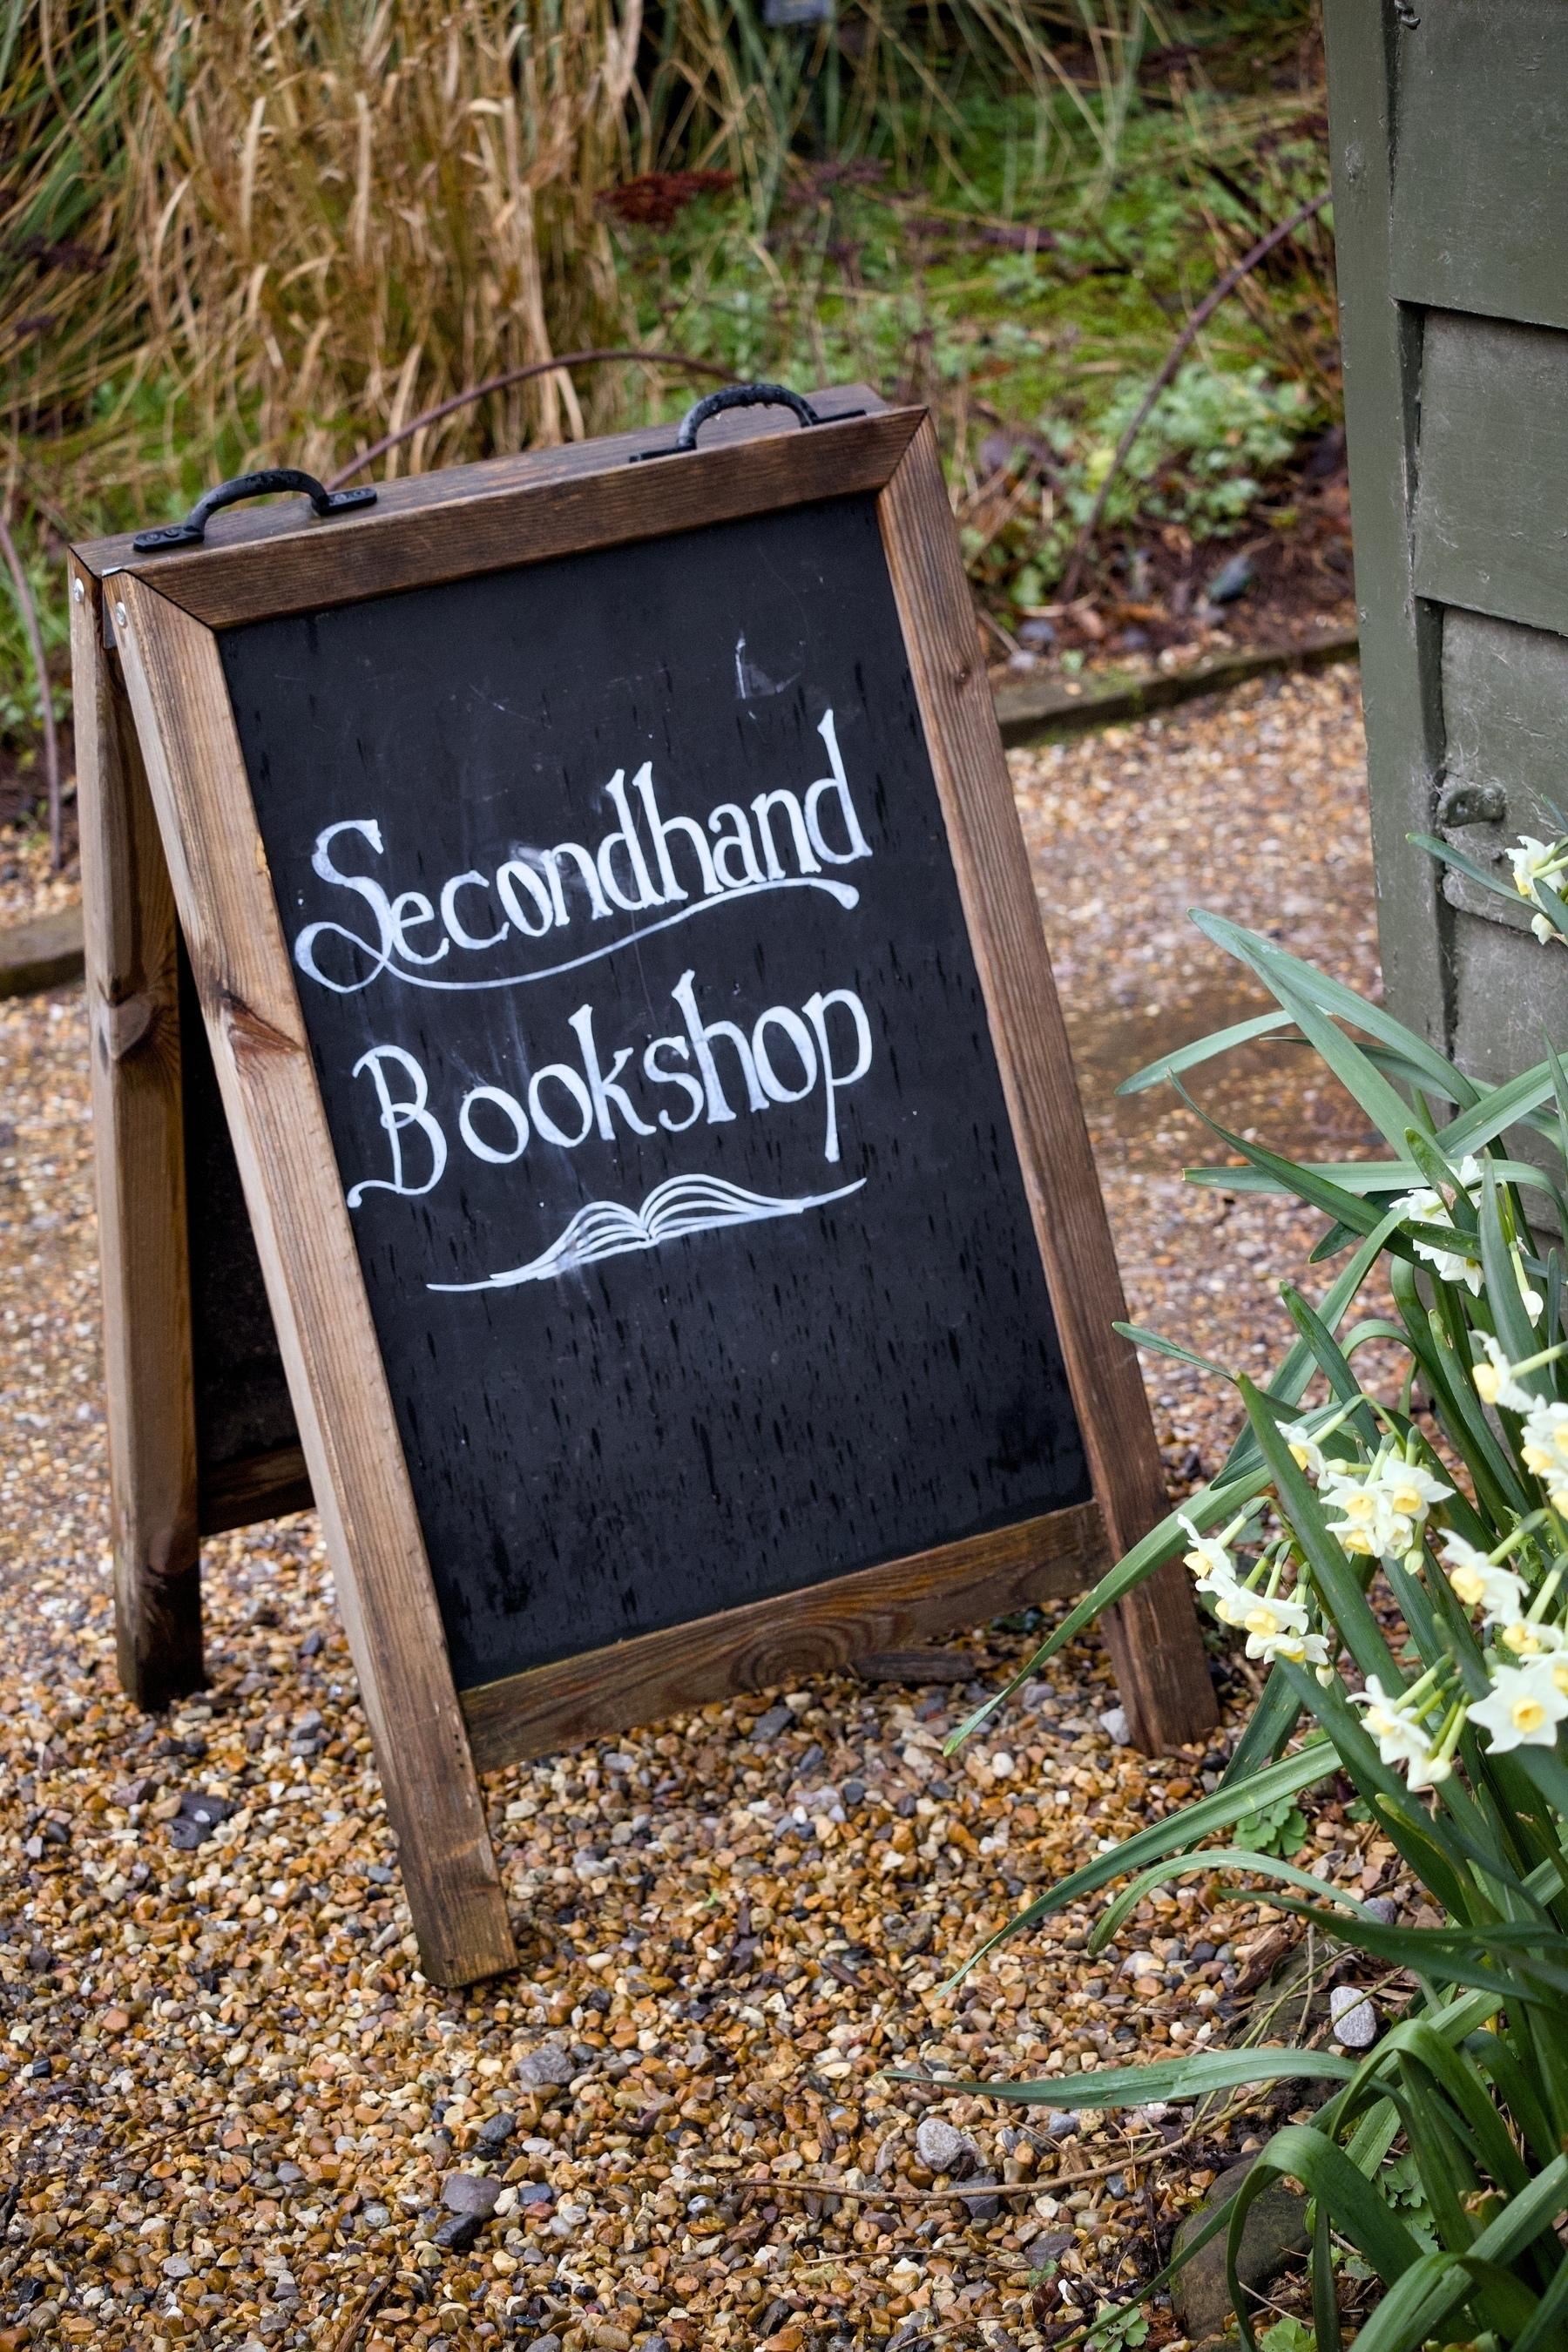 An a-frame backboard with “secondhand bookshop” written in chalk.